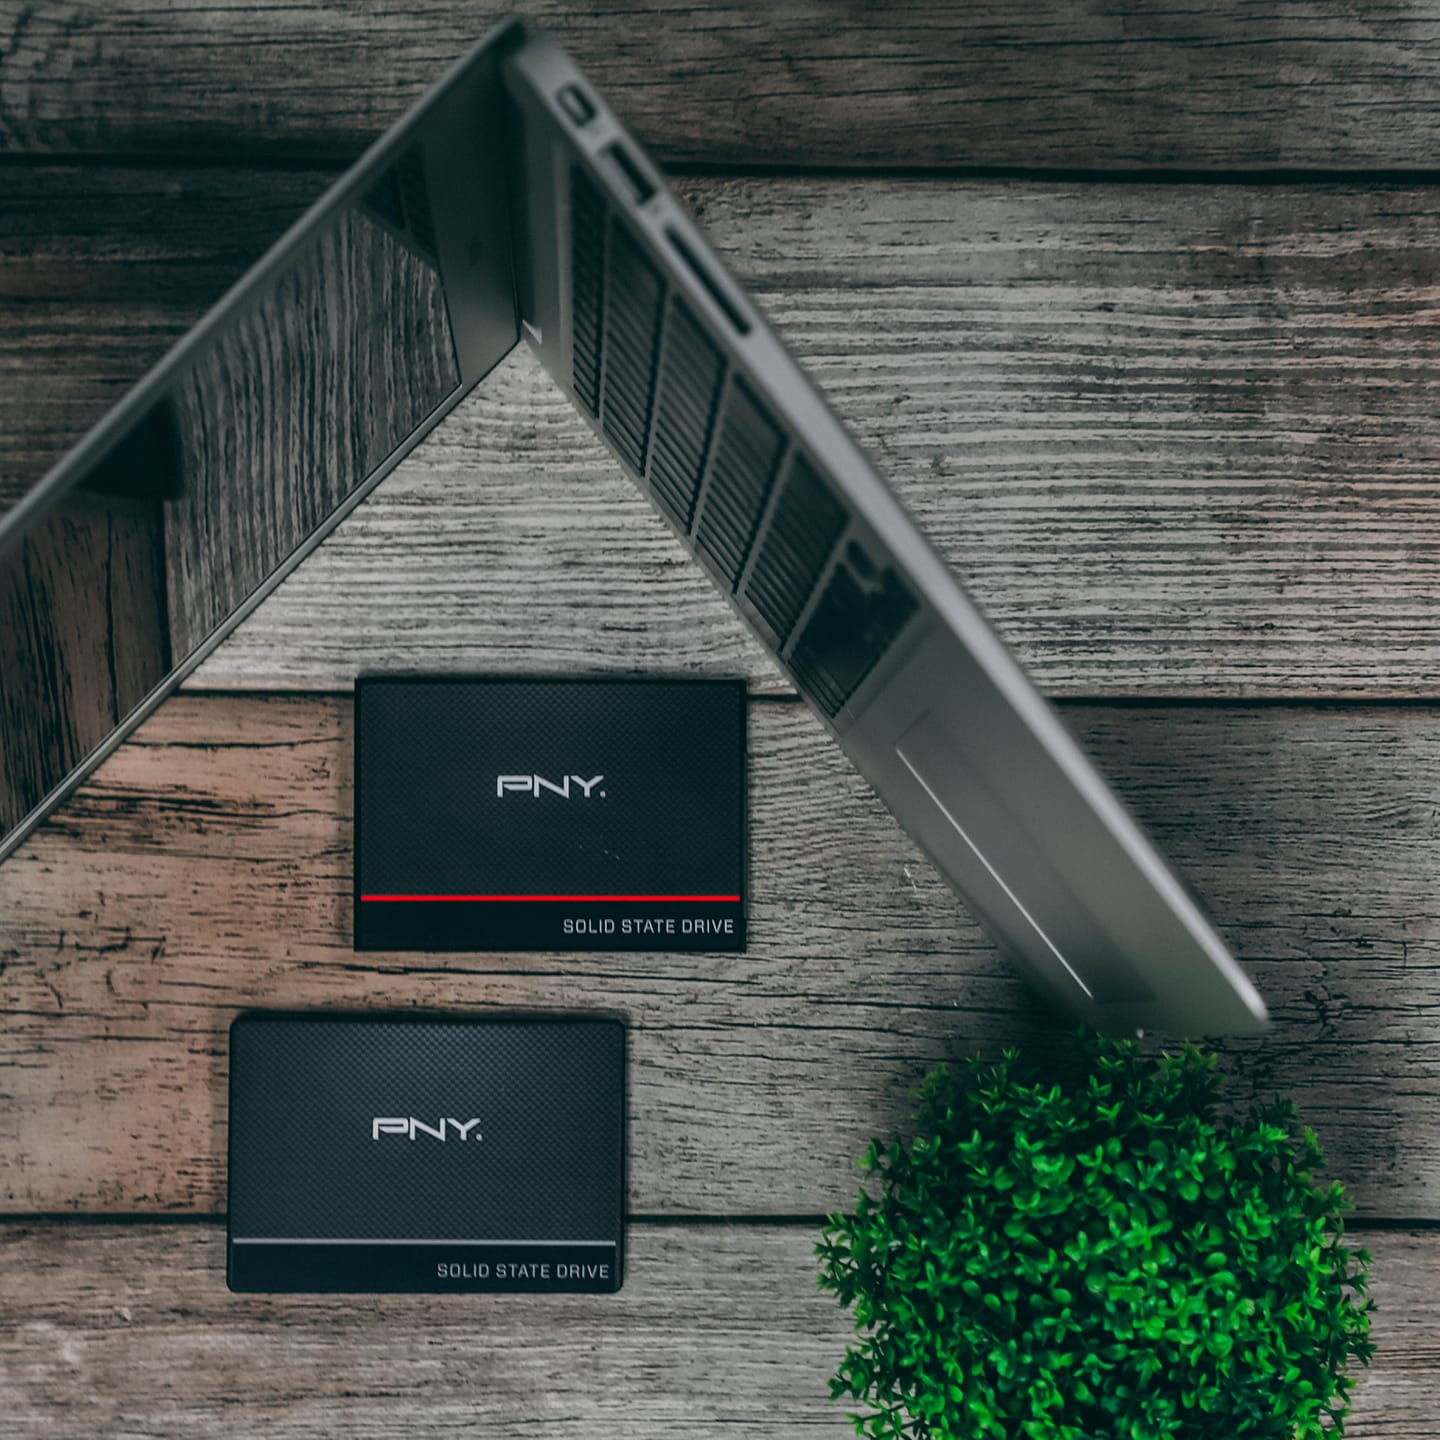 The PNY SSD ranges